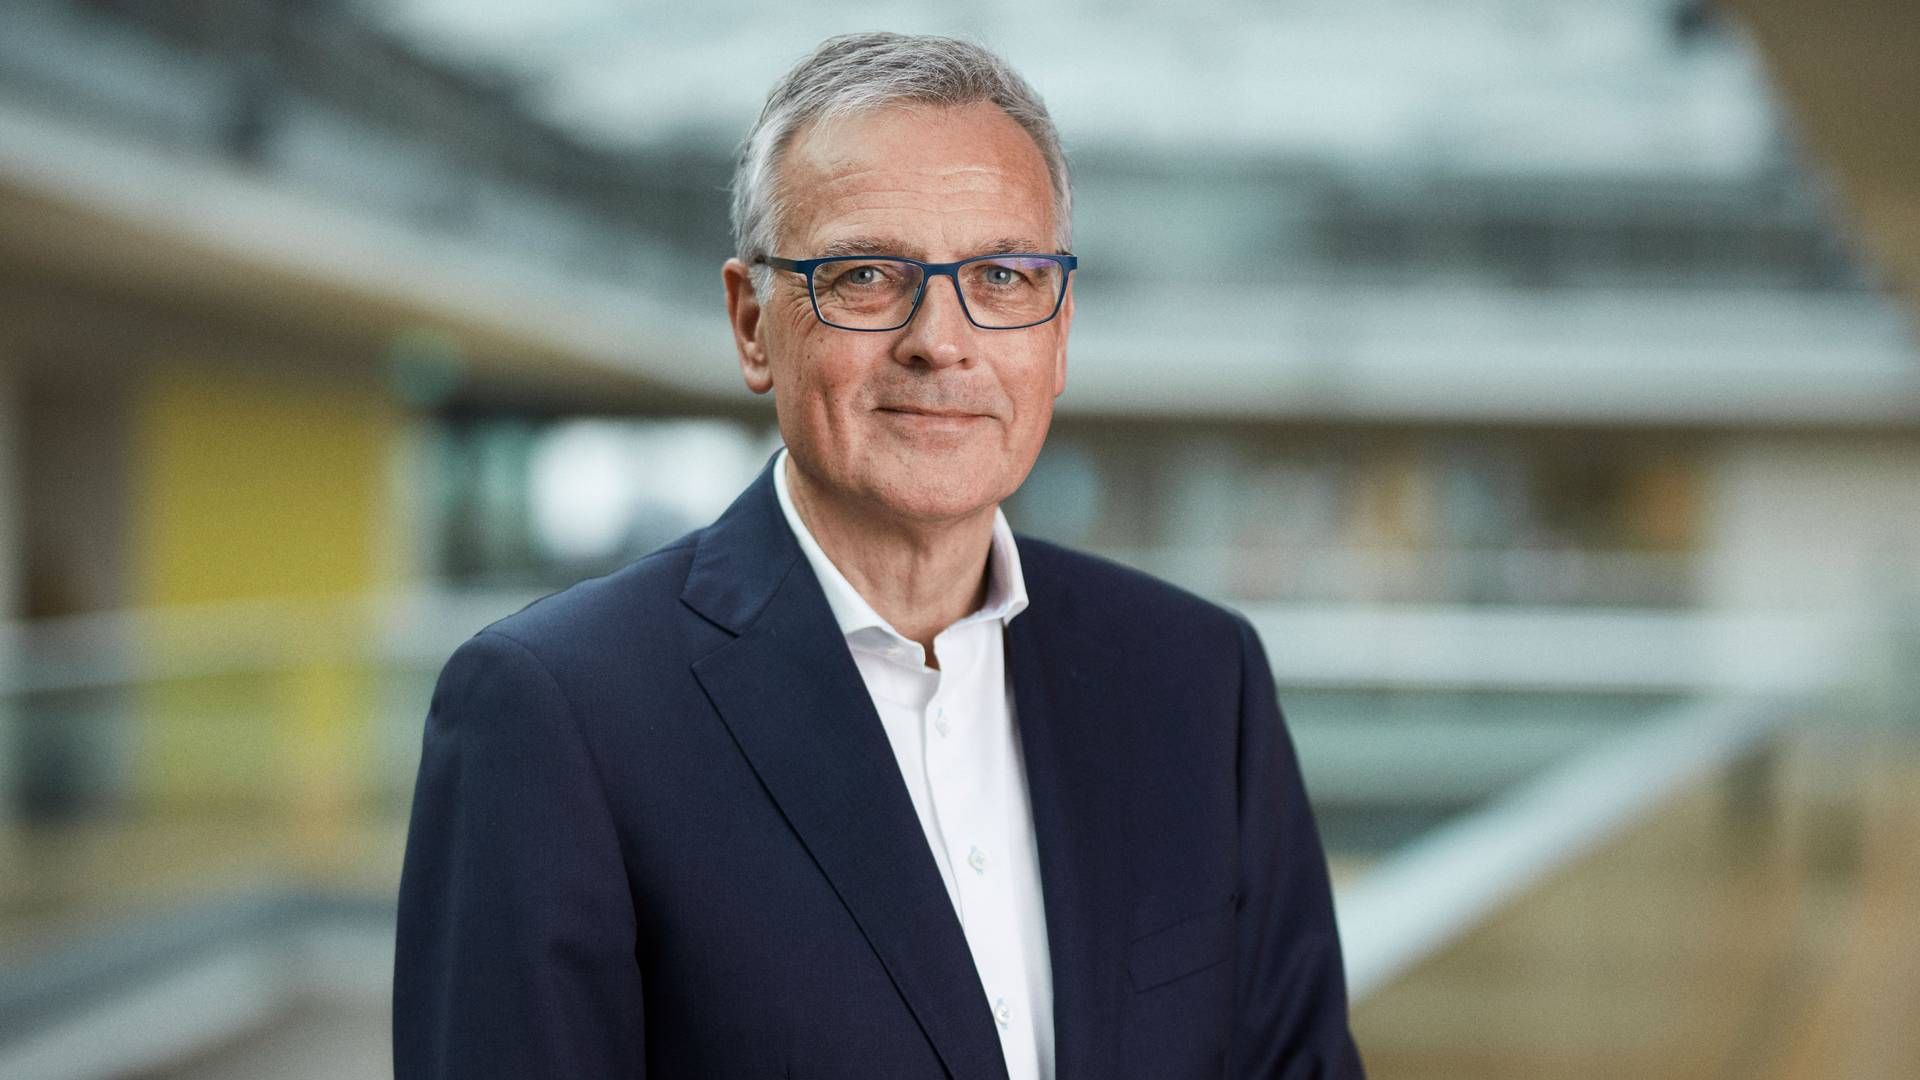 Claus Valentin Hemmingsen has been warming up for the position as chairman of the Ramboll Group for a year, during which he has served as vice chair. "There wasn't much to think about, it was just getting on with the job," he says. | Photo: Rambøll / Ture Andersen